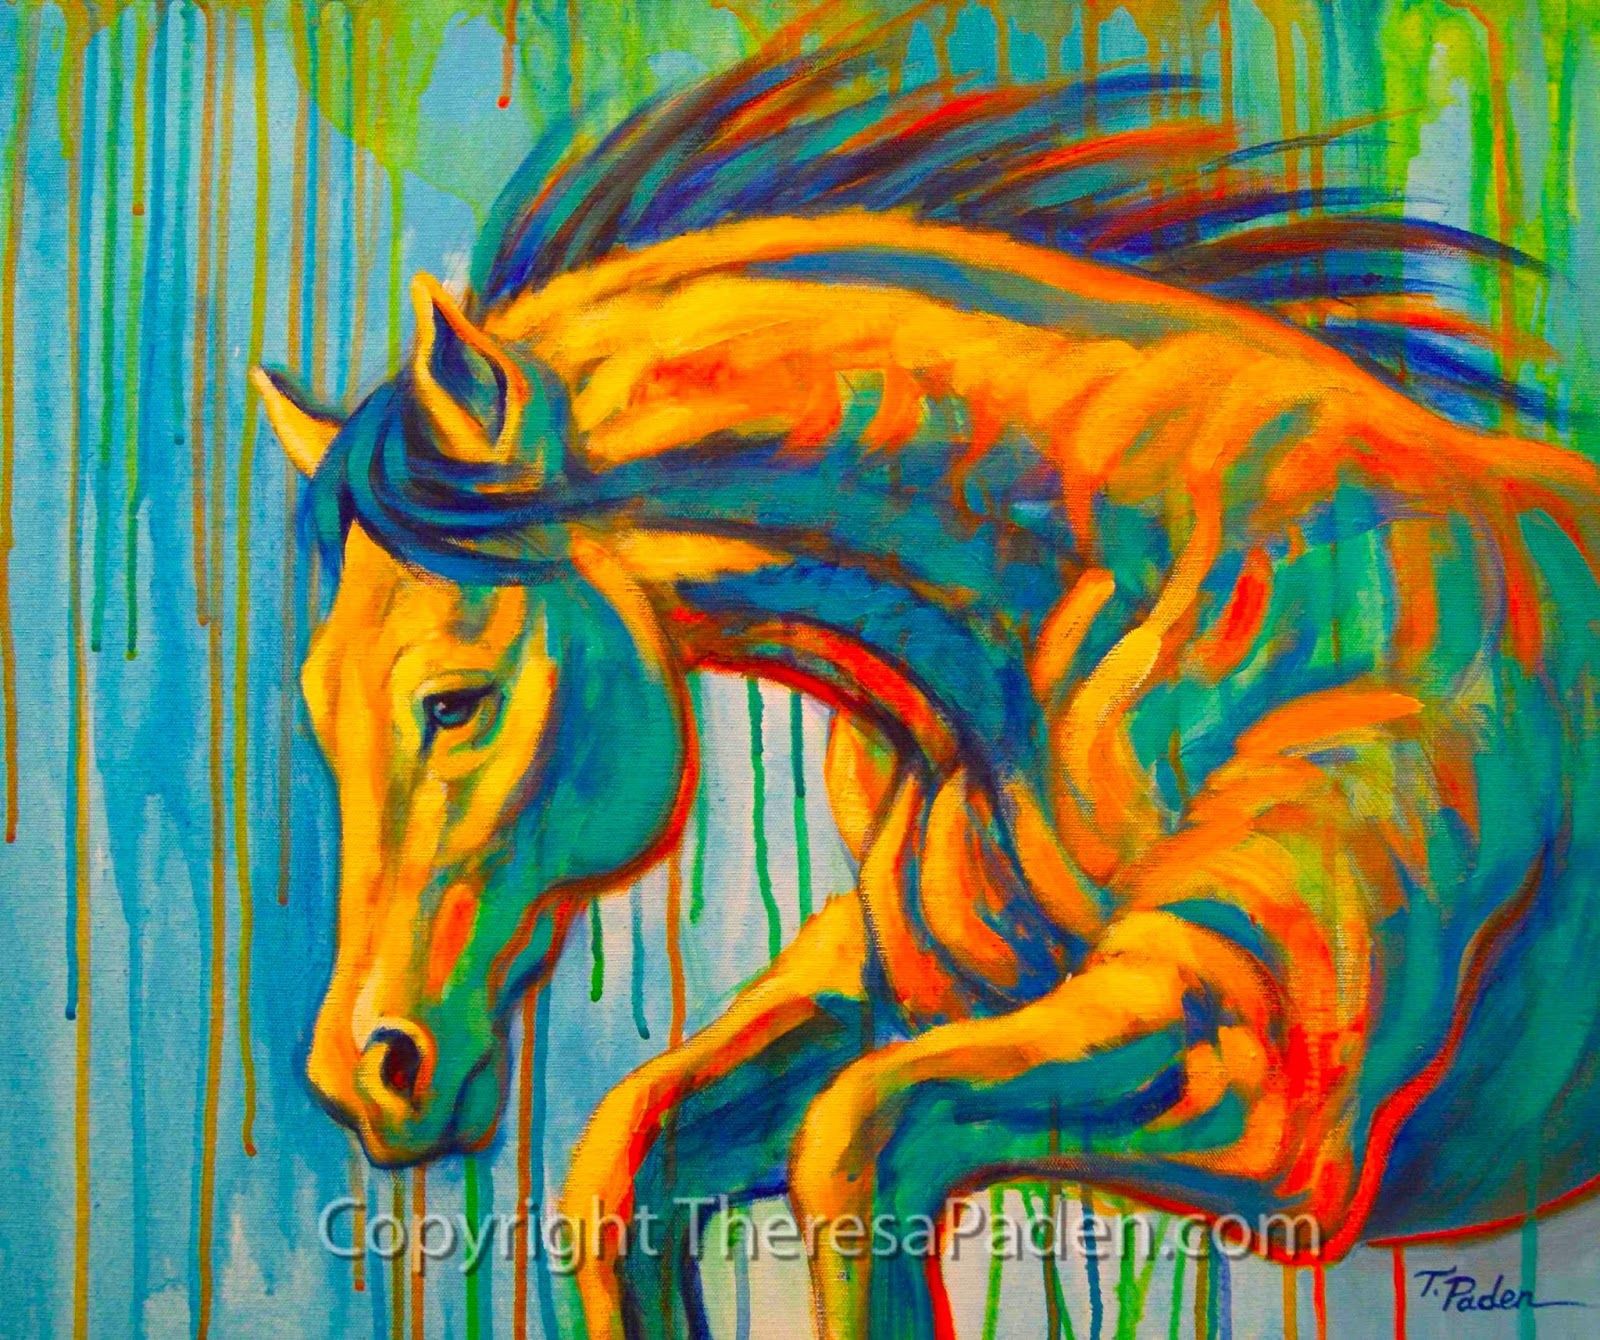 Abstract Horse Art in Bright Colors by Theresa Paden